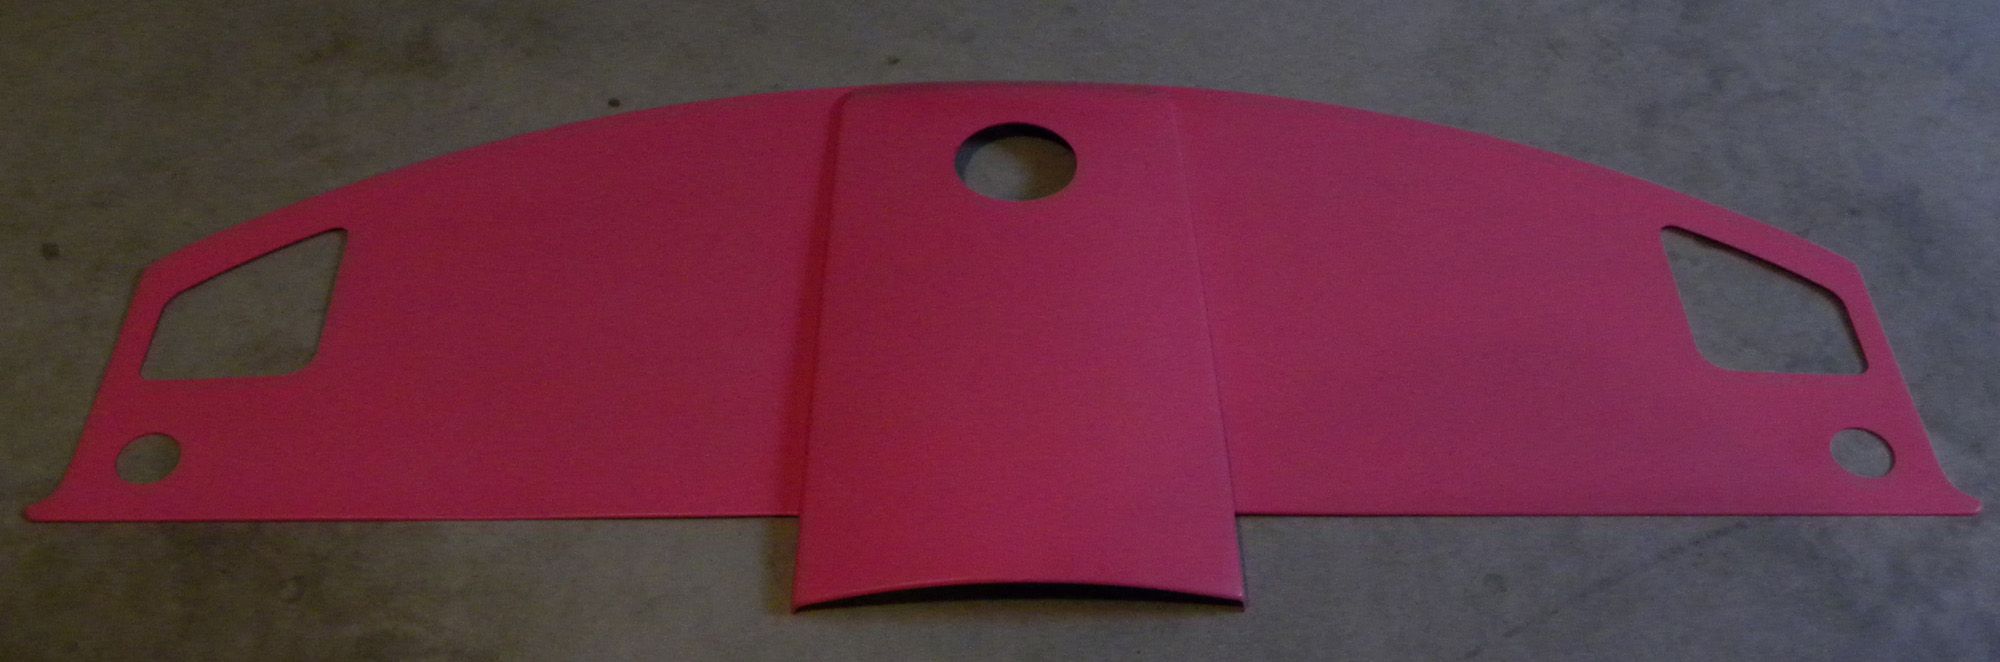 VW New Beetle Dash Cover Hot Pink Cool Retro Look